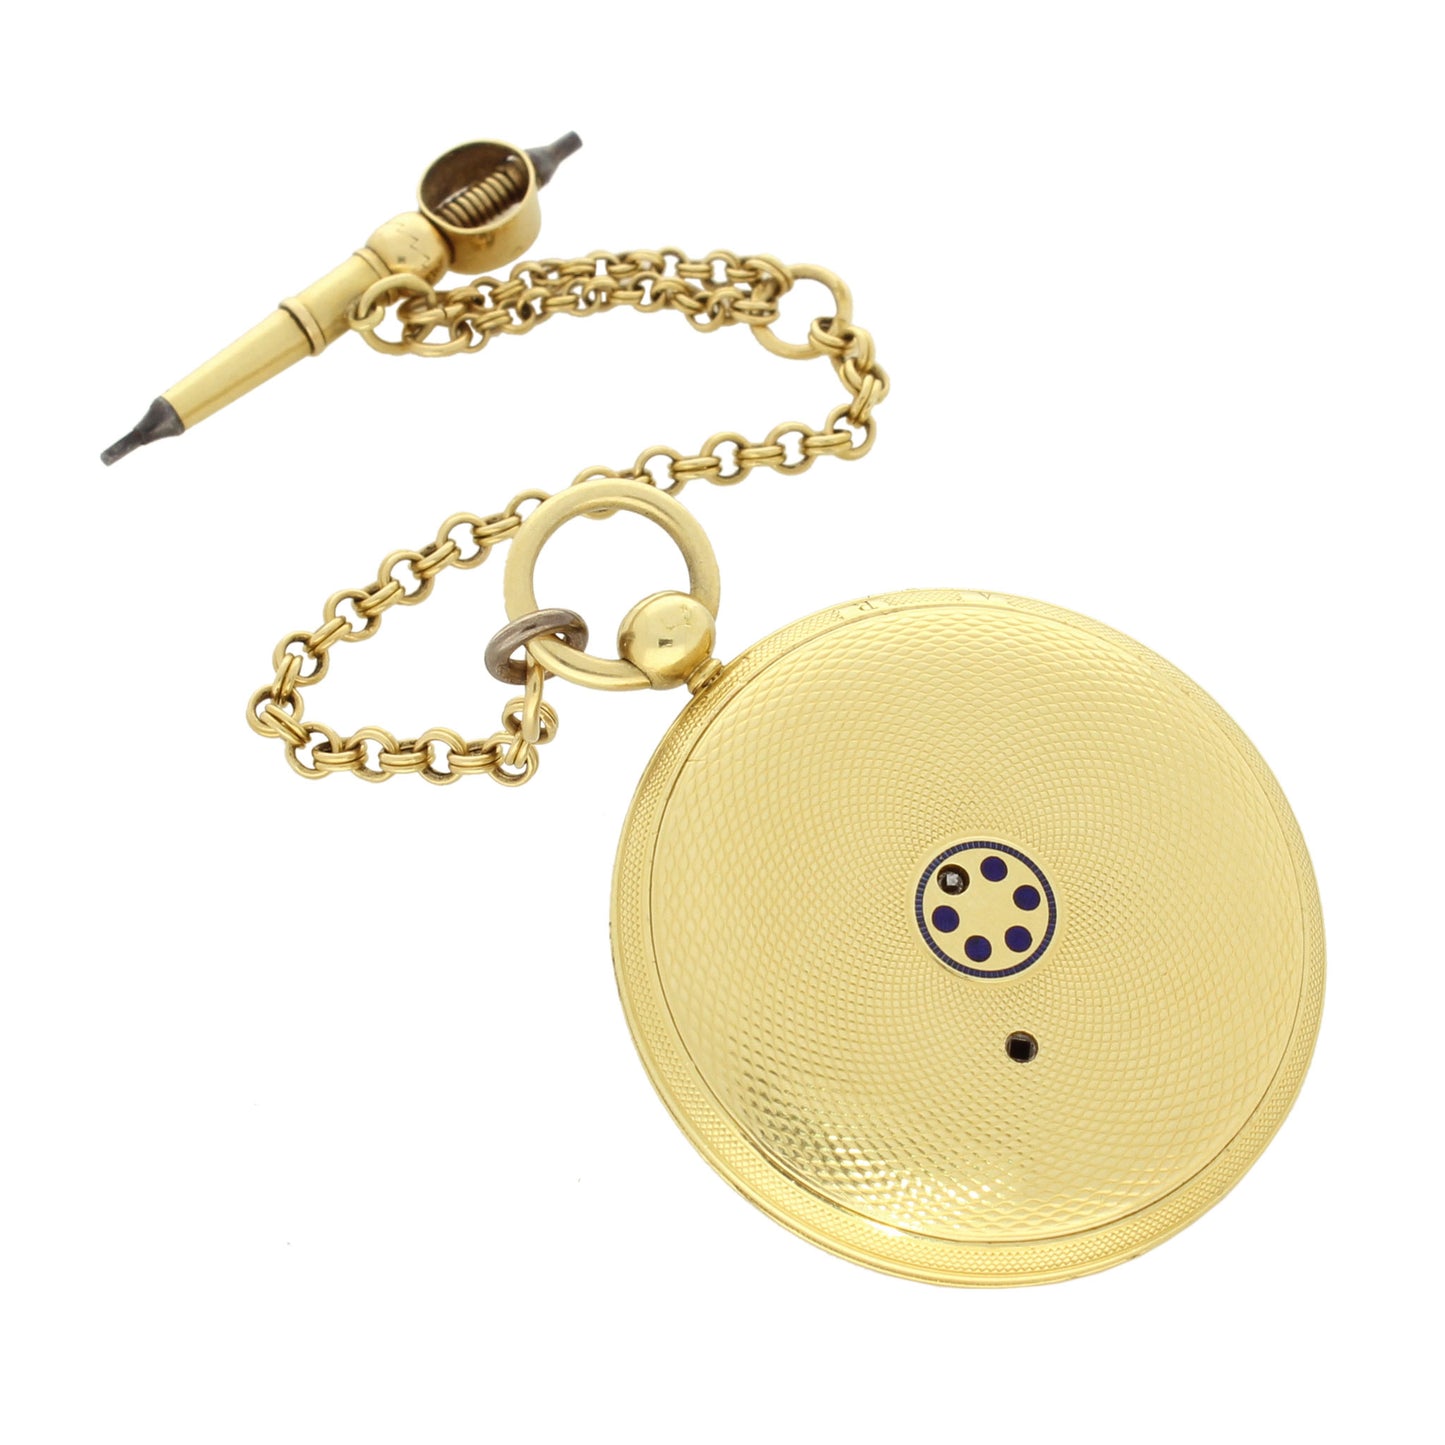 18ct yellow gold Breguet miniature open face pocket watch with chain. Made 1840’s